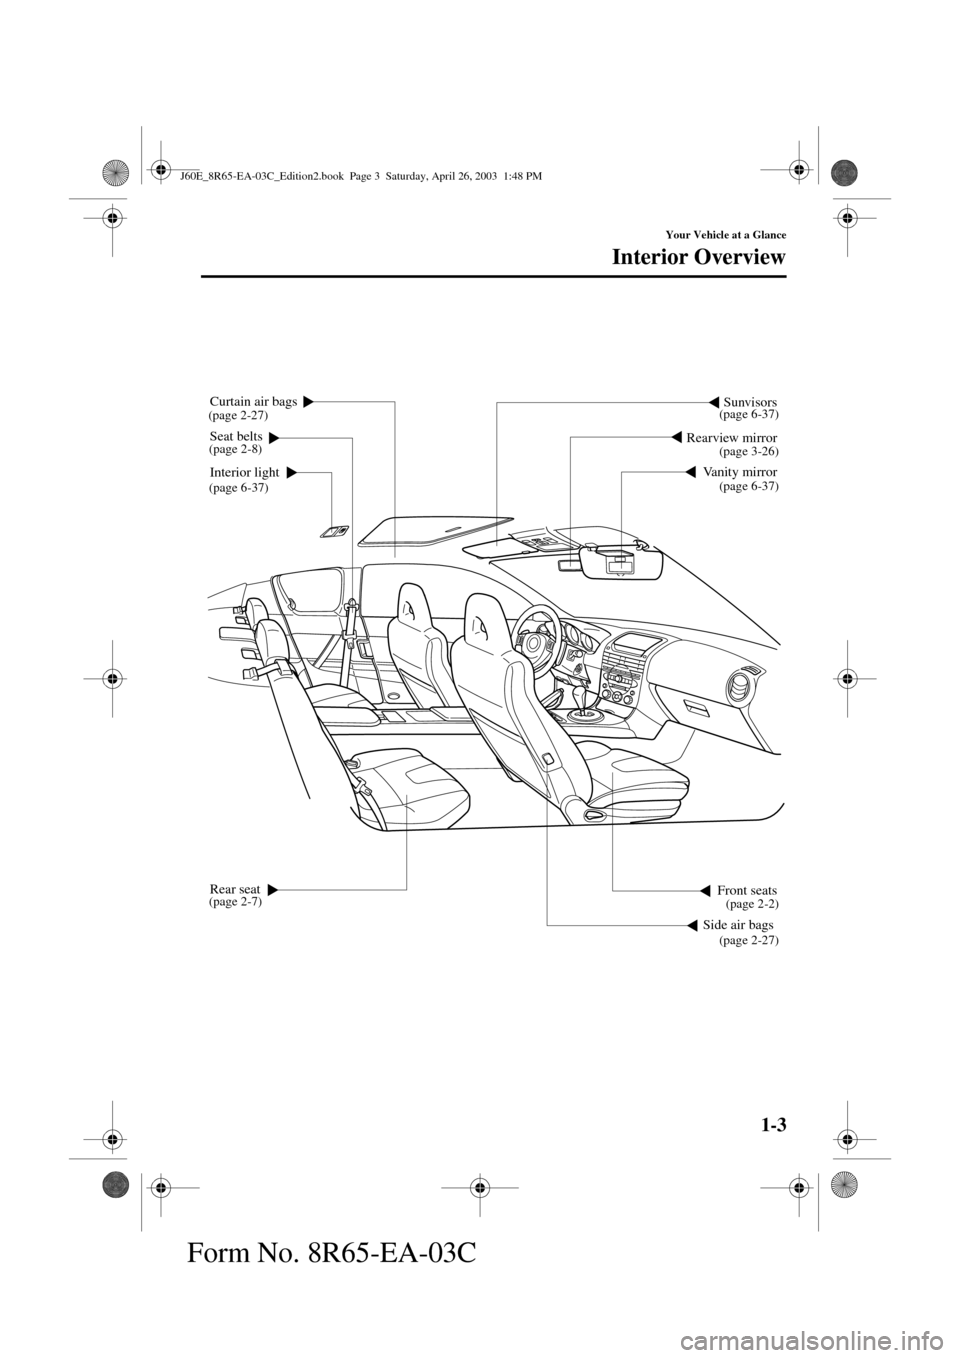 MAZDA MODEL RX 8 2004  Owners Manual (in English) 1-3
Your Vehicle at a Glance
Form No. 8R65-EA-03C
Interior Overview
Seat belts
Interior lightSunvisors
Rear seatVanity mirror Rearview mirror
Front seats Curtain air bags
Side air bags 
(page 6-37)
(p